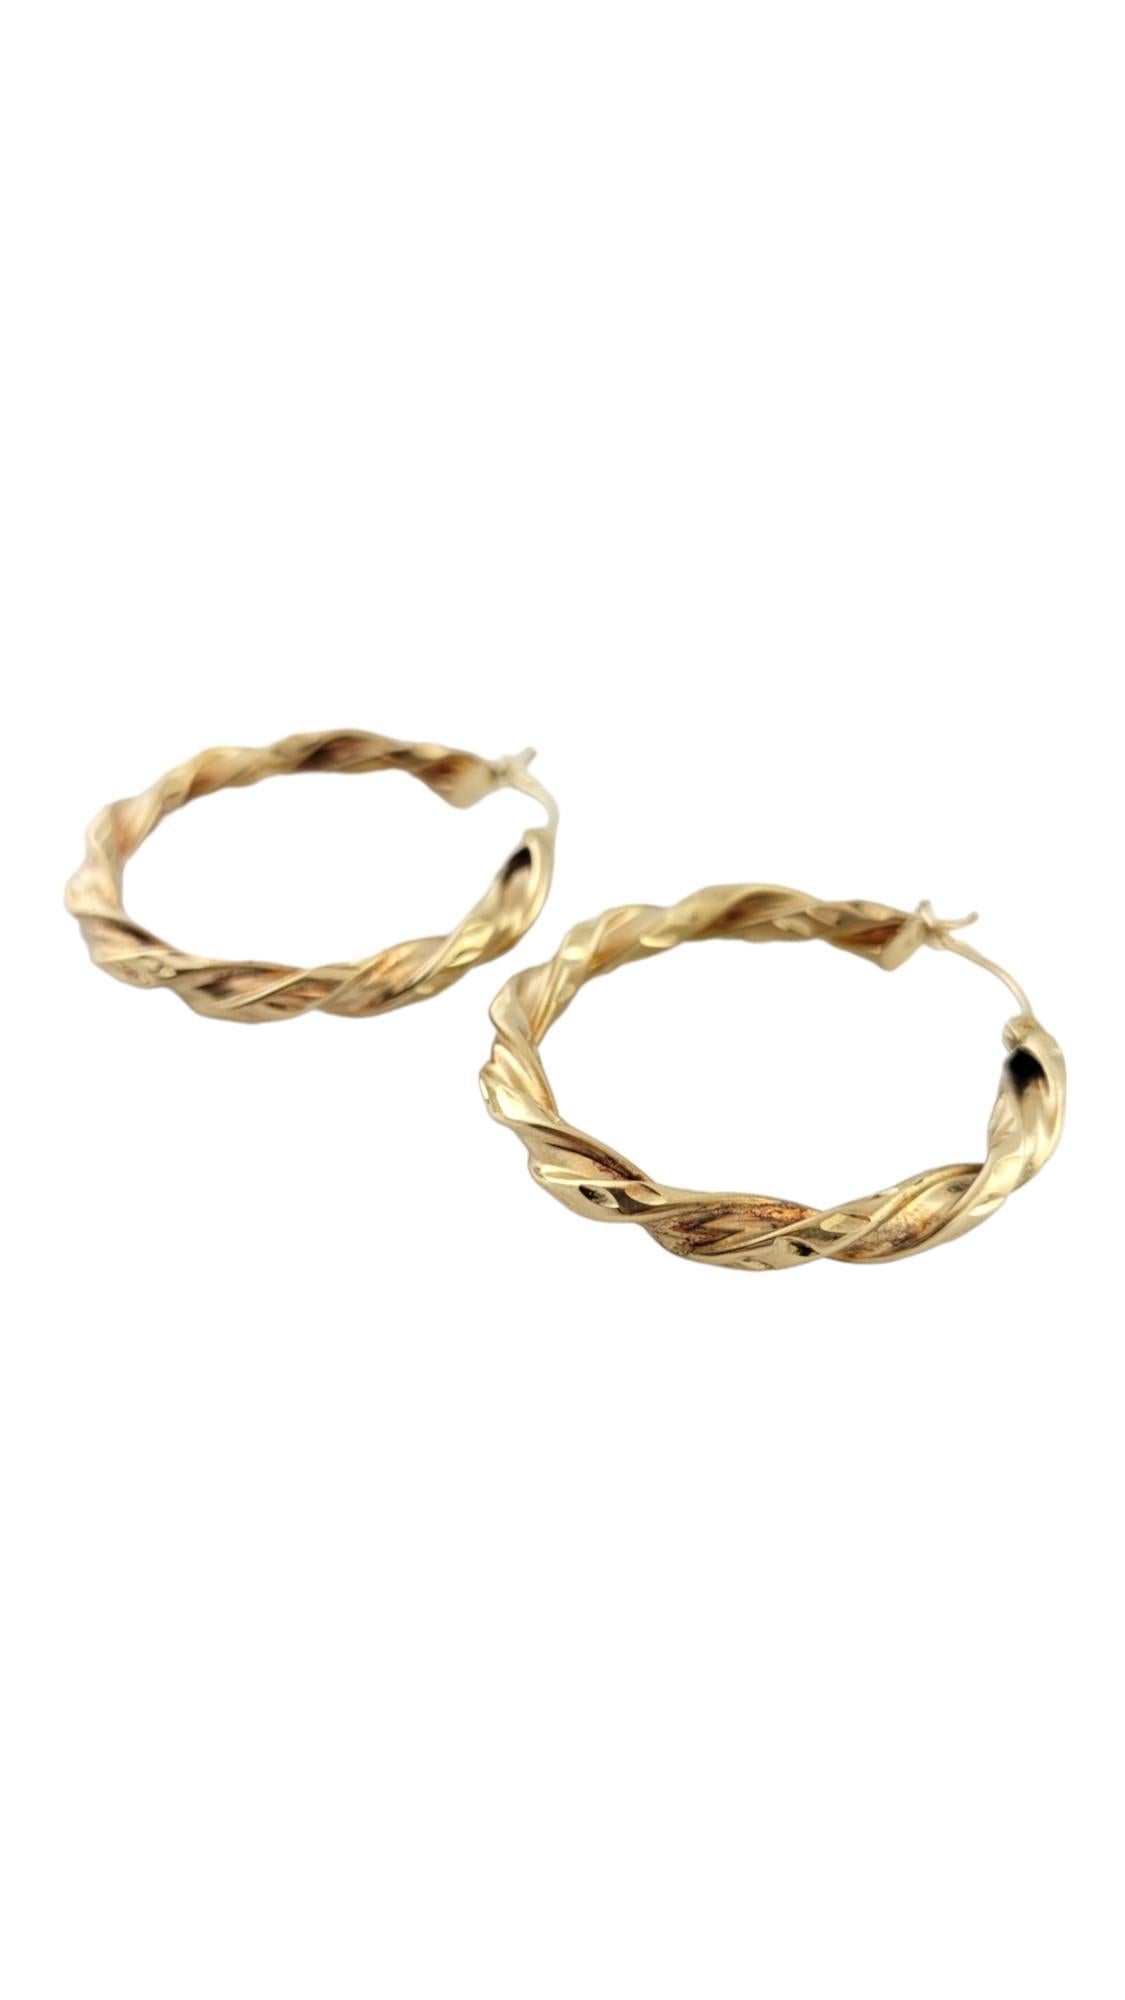 14K Yellow Gold Twisted Hoop Earrings #16135 In Good Condition For Sale In Washington Depot, CT